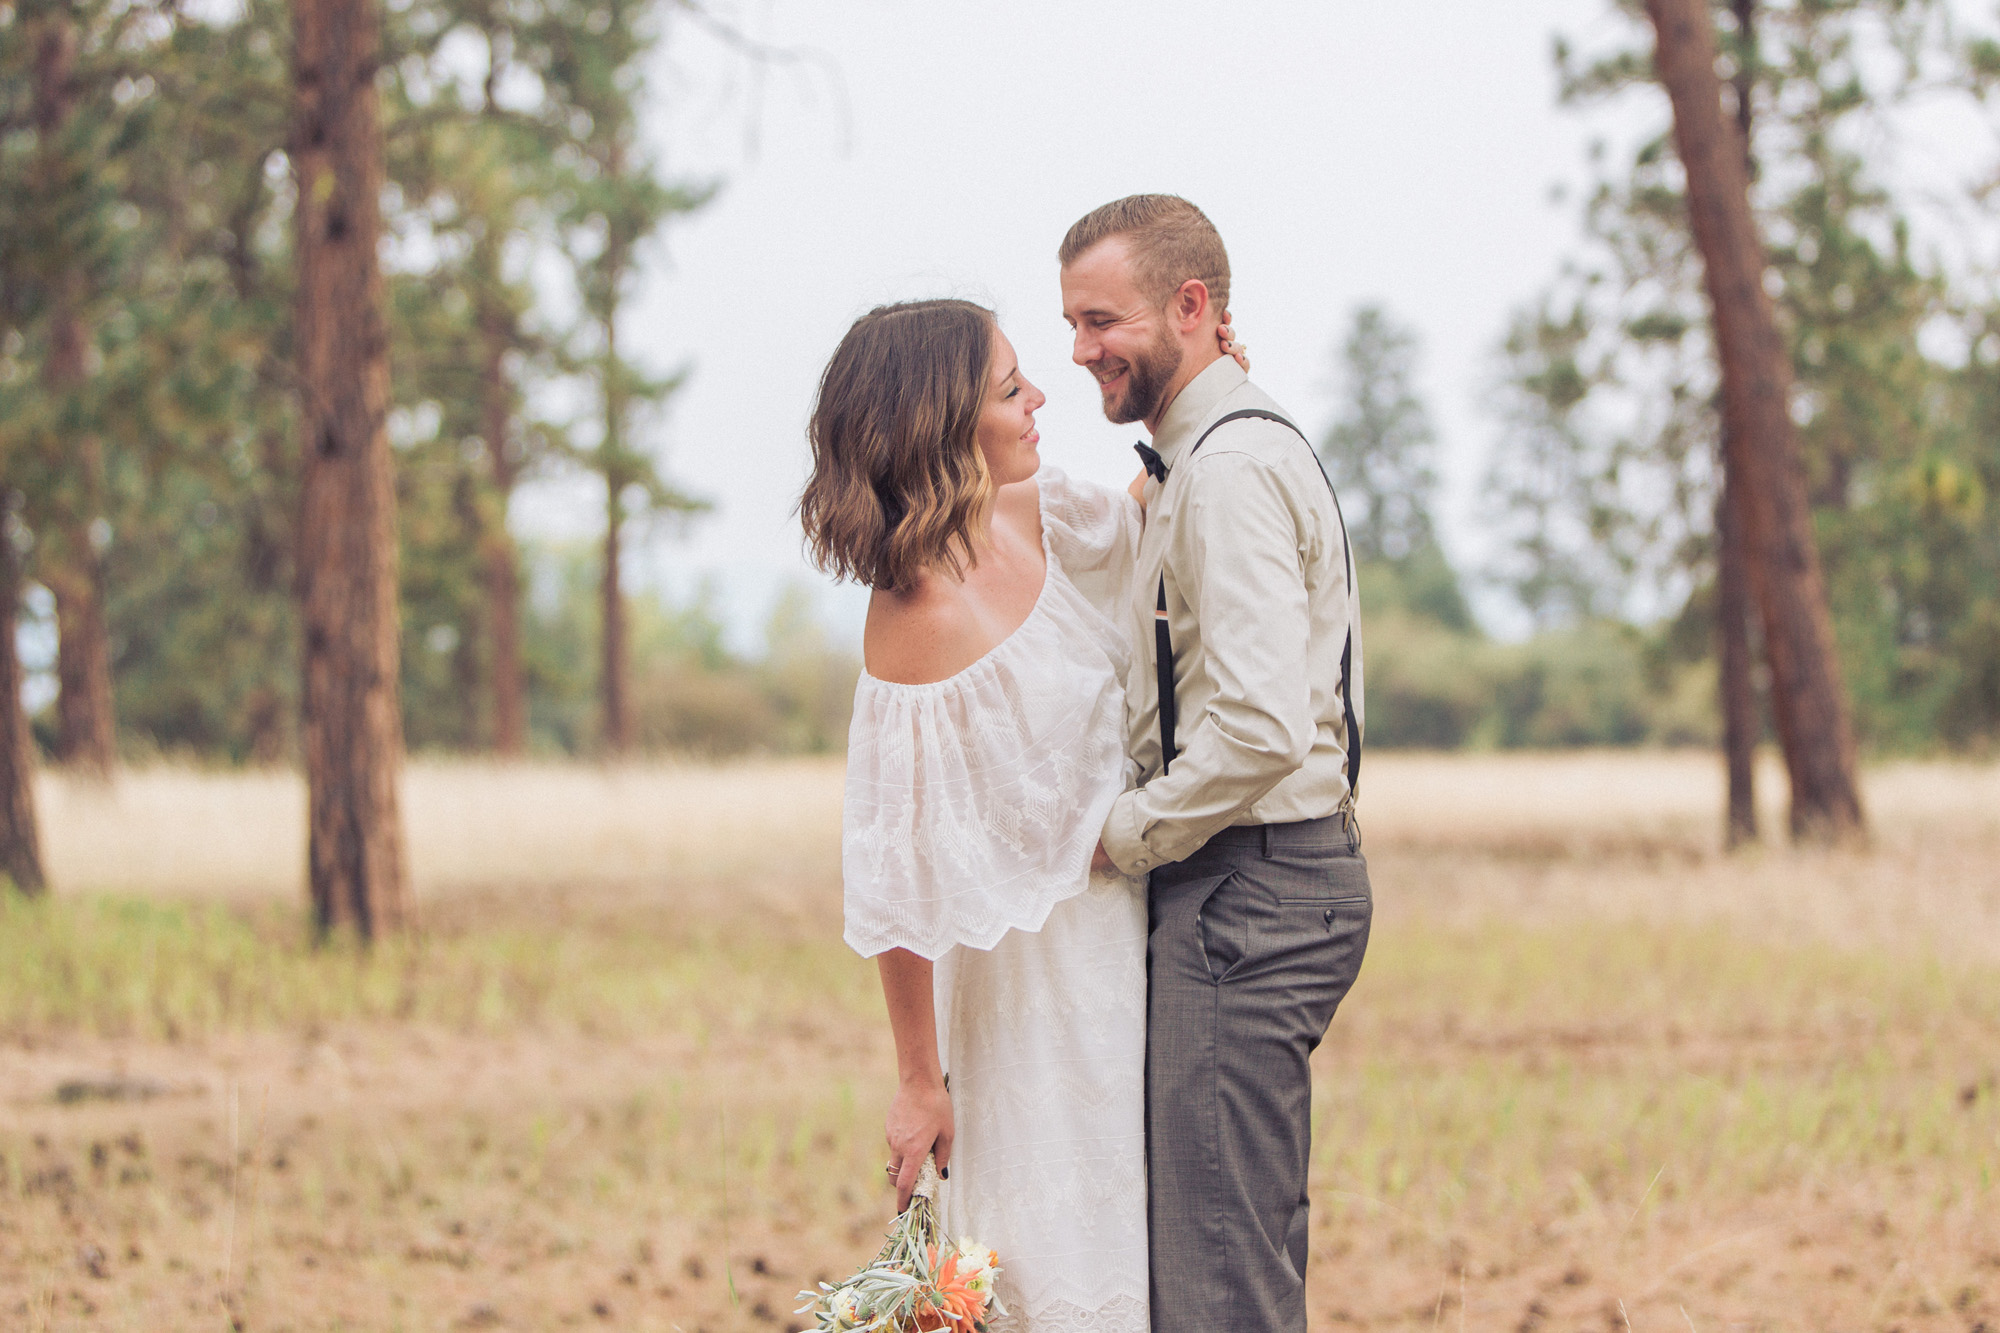 Rocky Mountain School of Photography Wedding Photography Career Training – and the beginning of our stylized wedding shoot